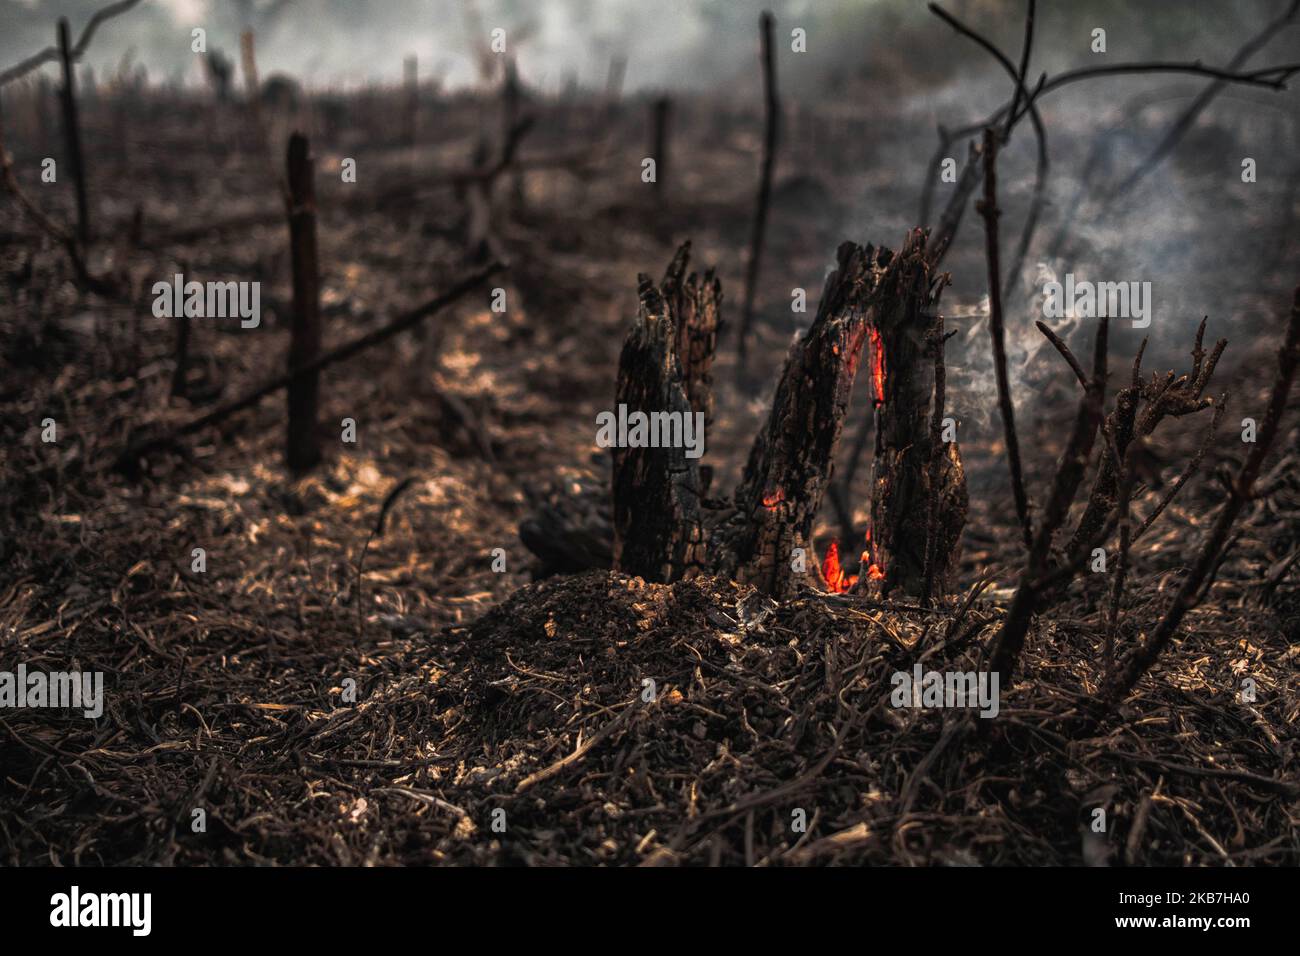 A peat land fire is seen at Rumbai Pesisir village Pekanbaru, Riau,  Indonesia, on October. 04, 2019 During Indonesia's annual dry season,  hundreds of fires are often illegally ignited to clear forests